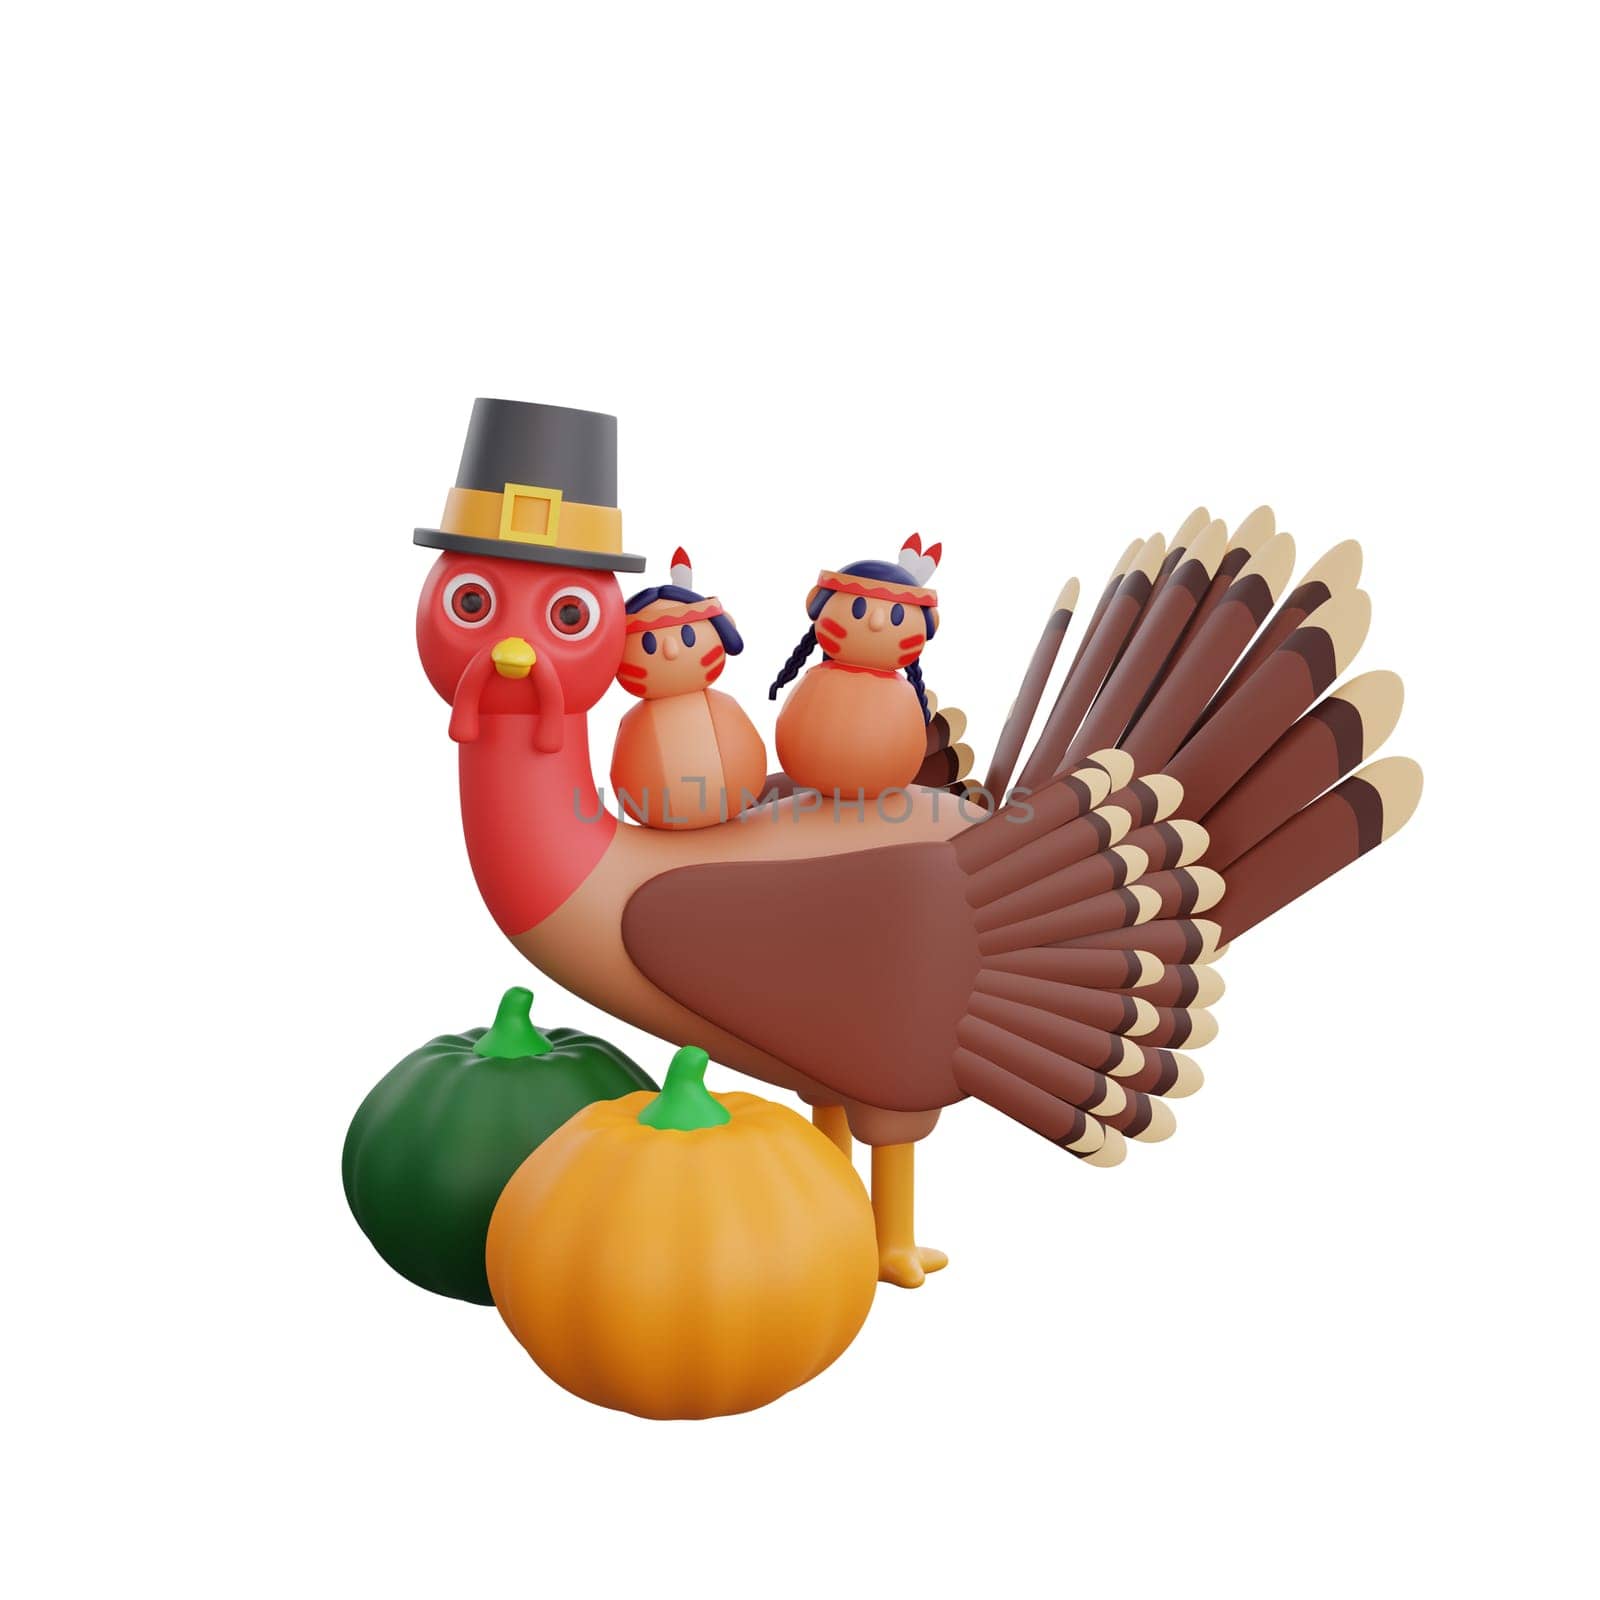 3d illustration of a turkey wearing a hat and two Native American dolls, accompanied by two vibrant pumpkins. perfect theme for Thanksgiving design